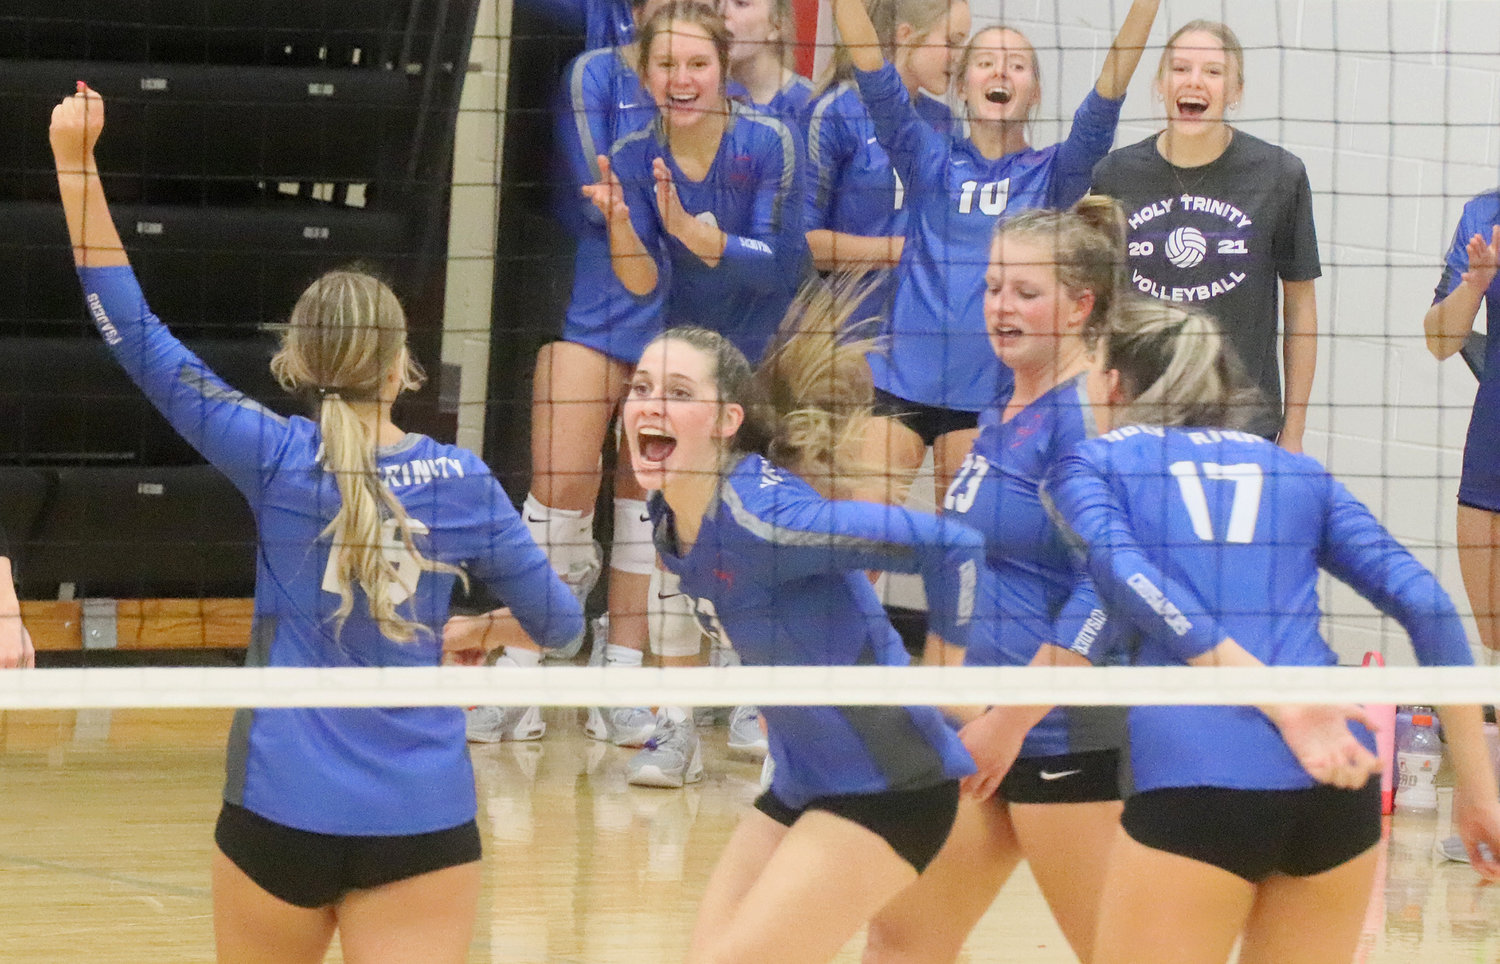 The Crusaders celebrate a tie breaker win in the third game against WACO to advance to the semifinals Saturday night in Burlington.